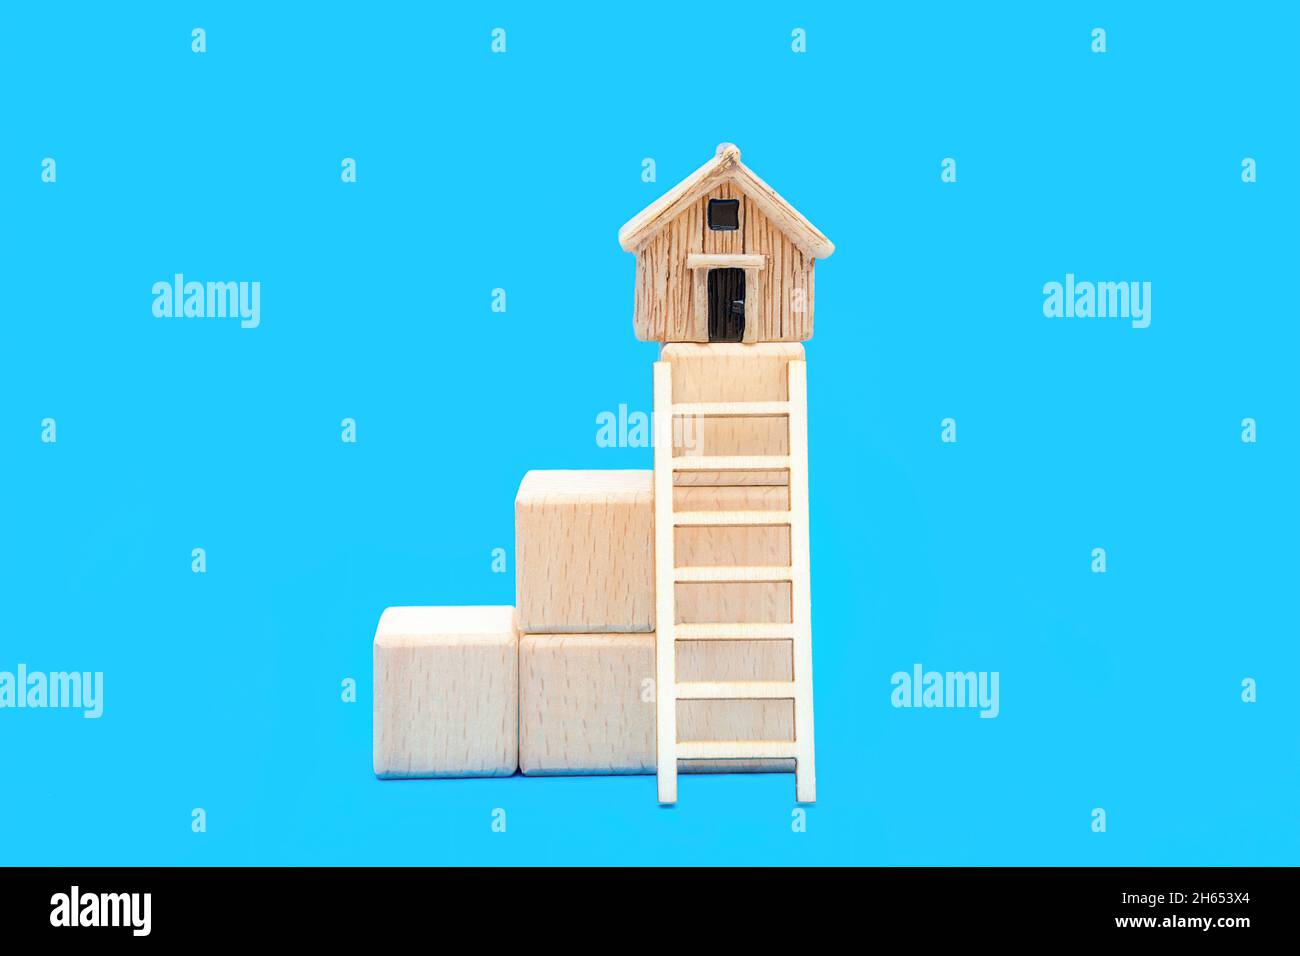 Toy ladder leading to a small house on top of stacked wooden blocks isolated on a blue background. The concept of getting on a property ladder. Stock Photo